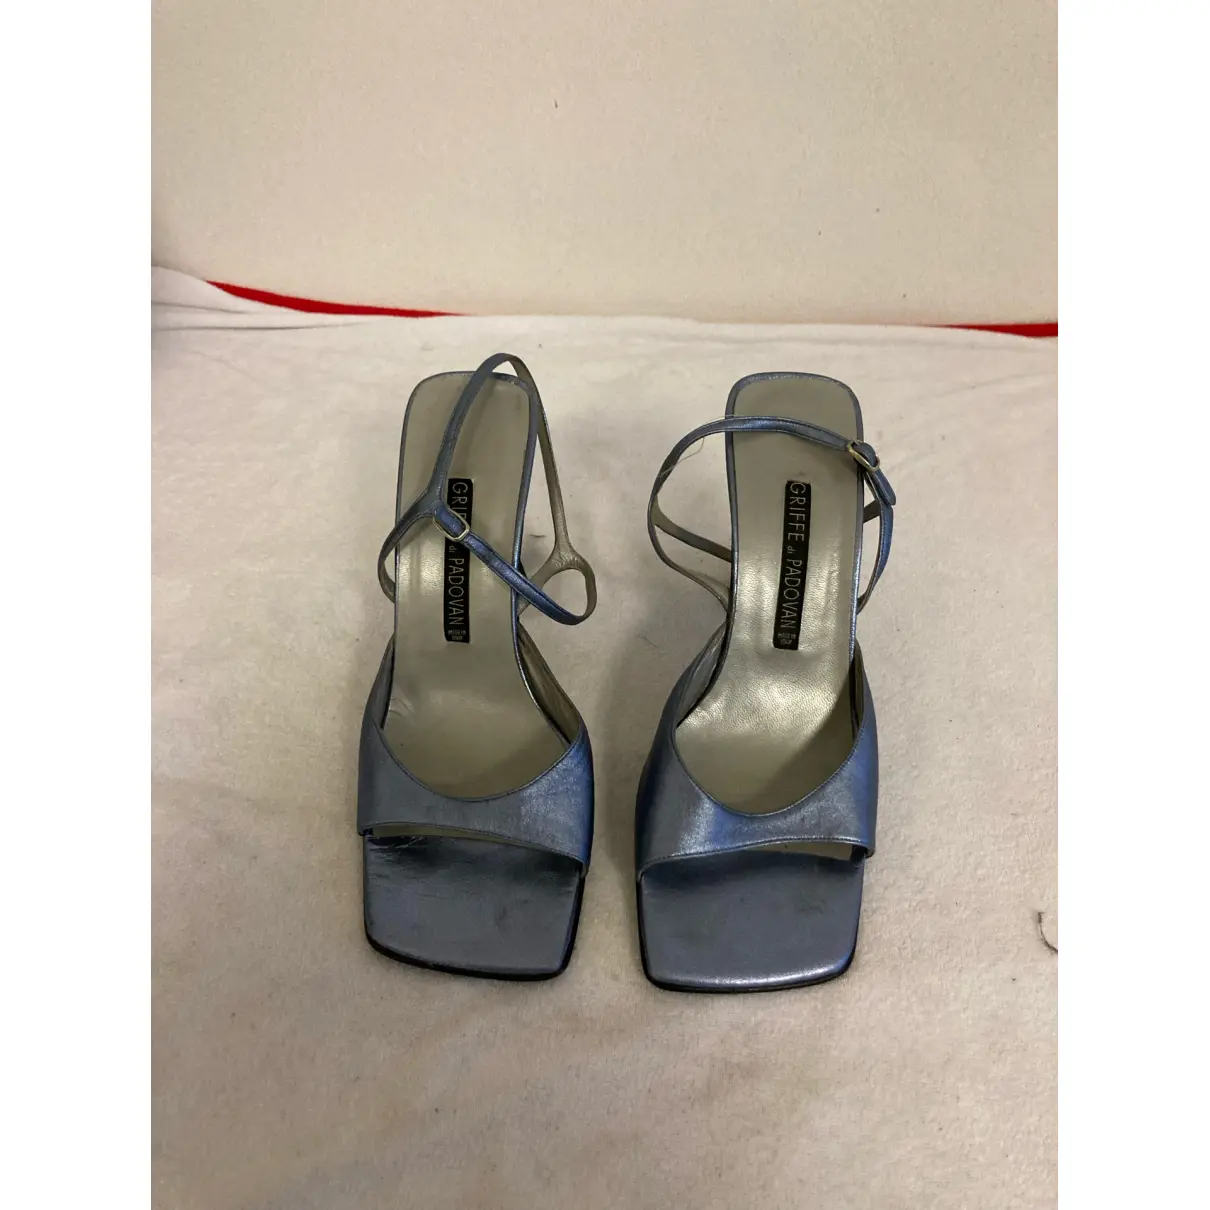 Buy Luciano Padovan Leather sandals online